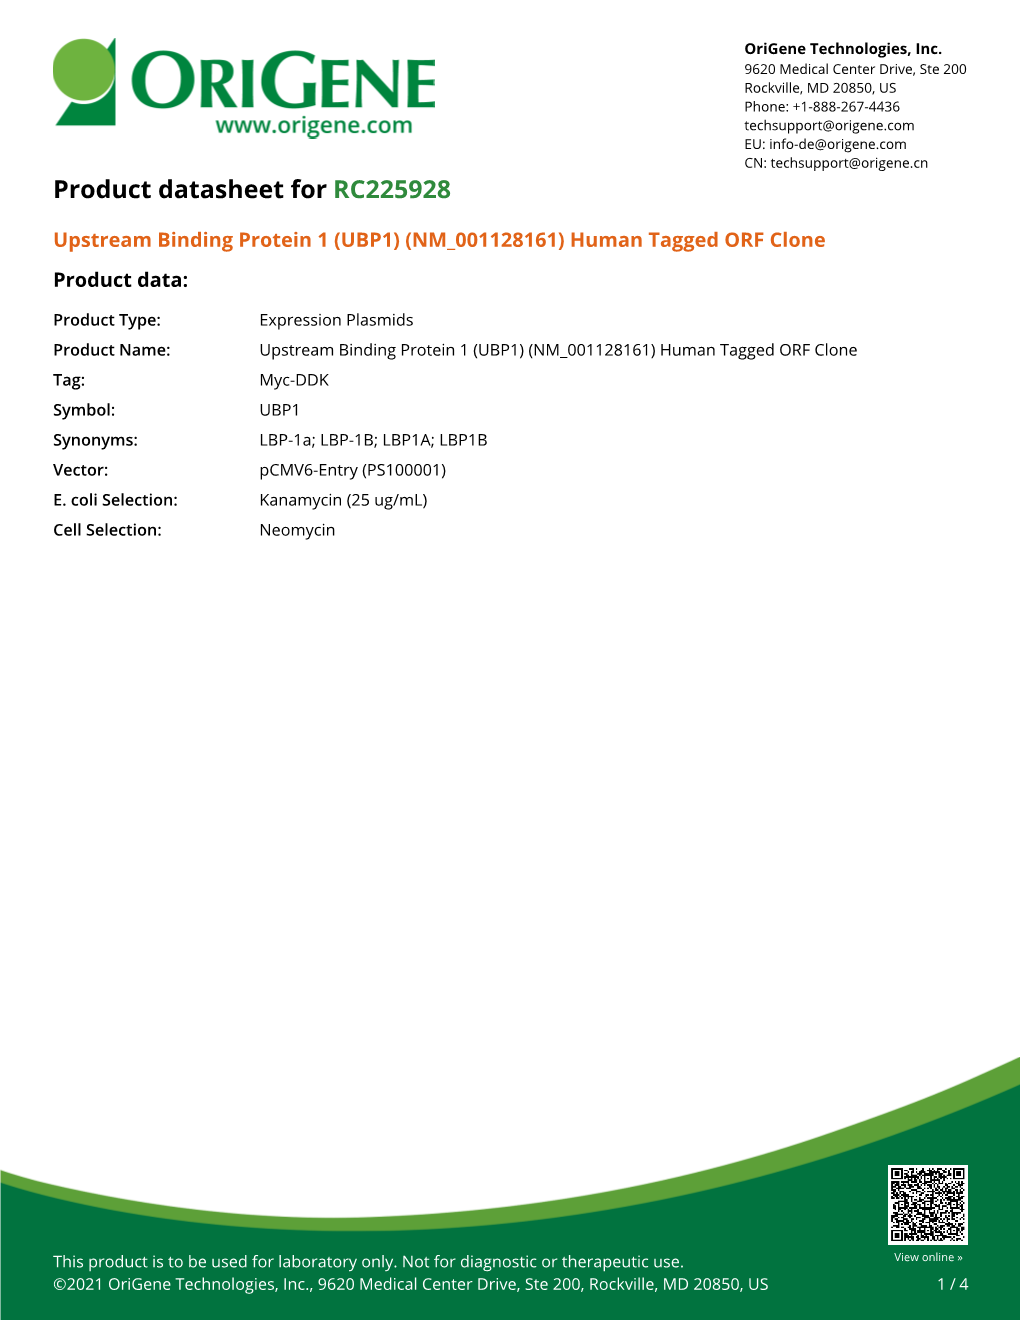 Upstream Binding Protein 1 (UBP1) (NM 001128161) Human Tagged ORF Clone Product Data